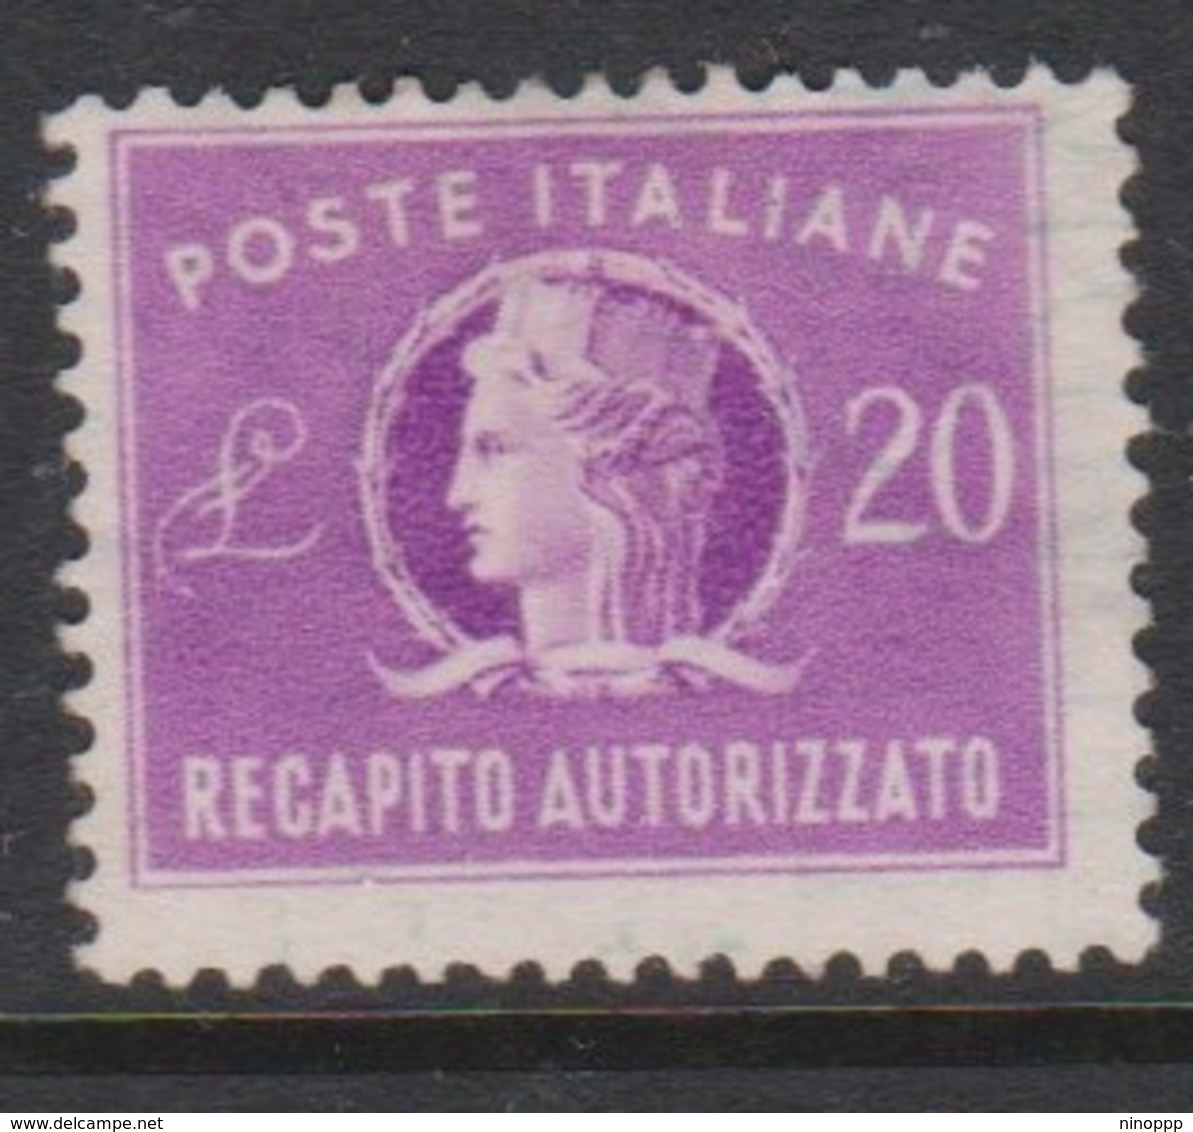 Italy Republic AD 11 1952 Authorized Delivery Stamp 20 Lire Lilac ,used - Express/pneumatic Mail